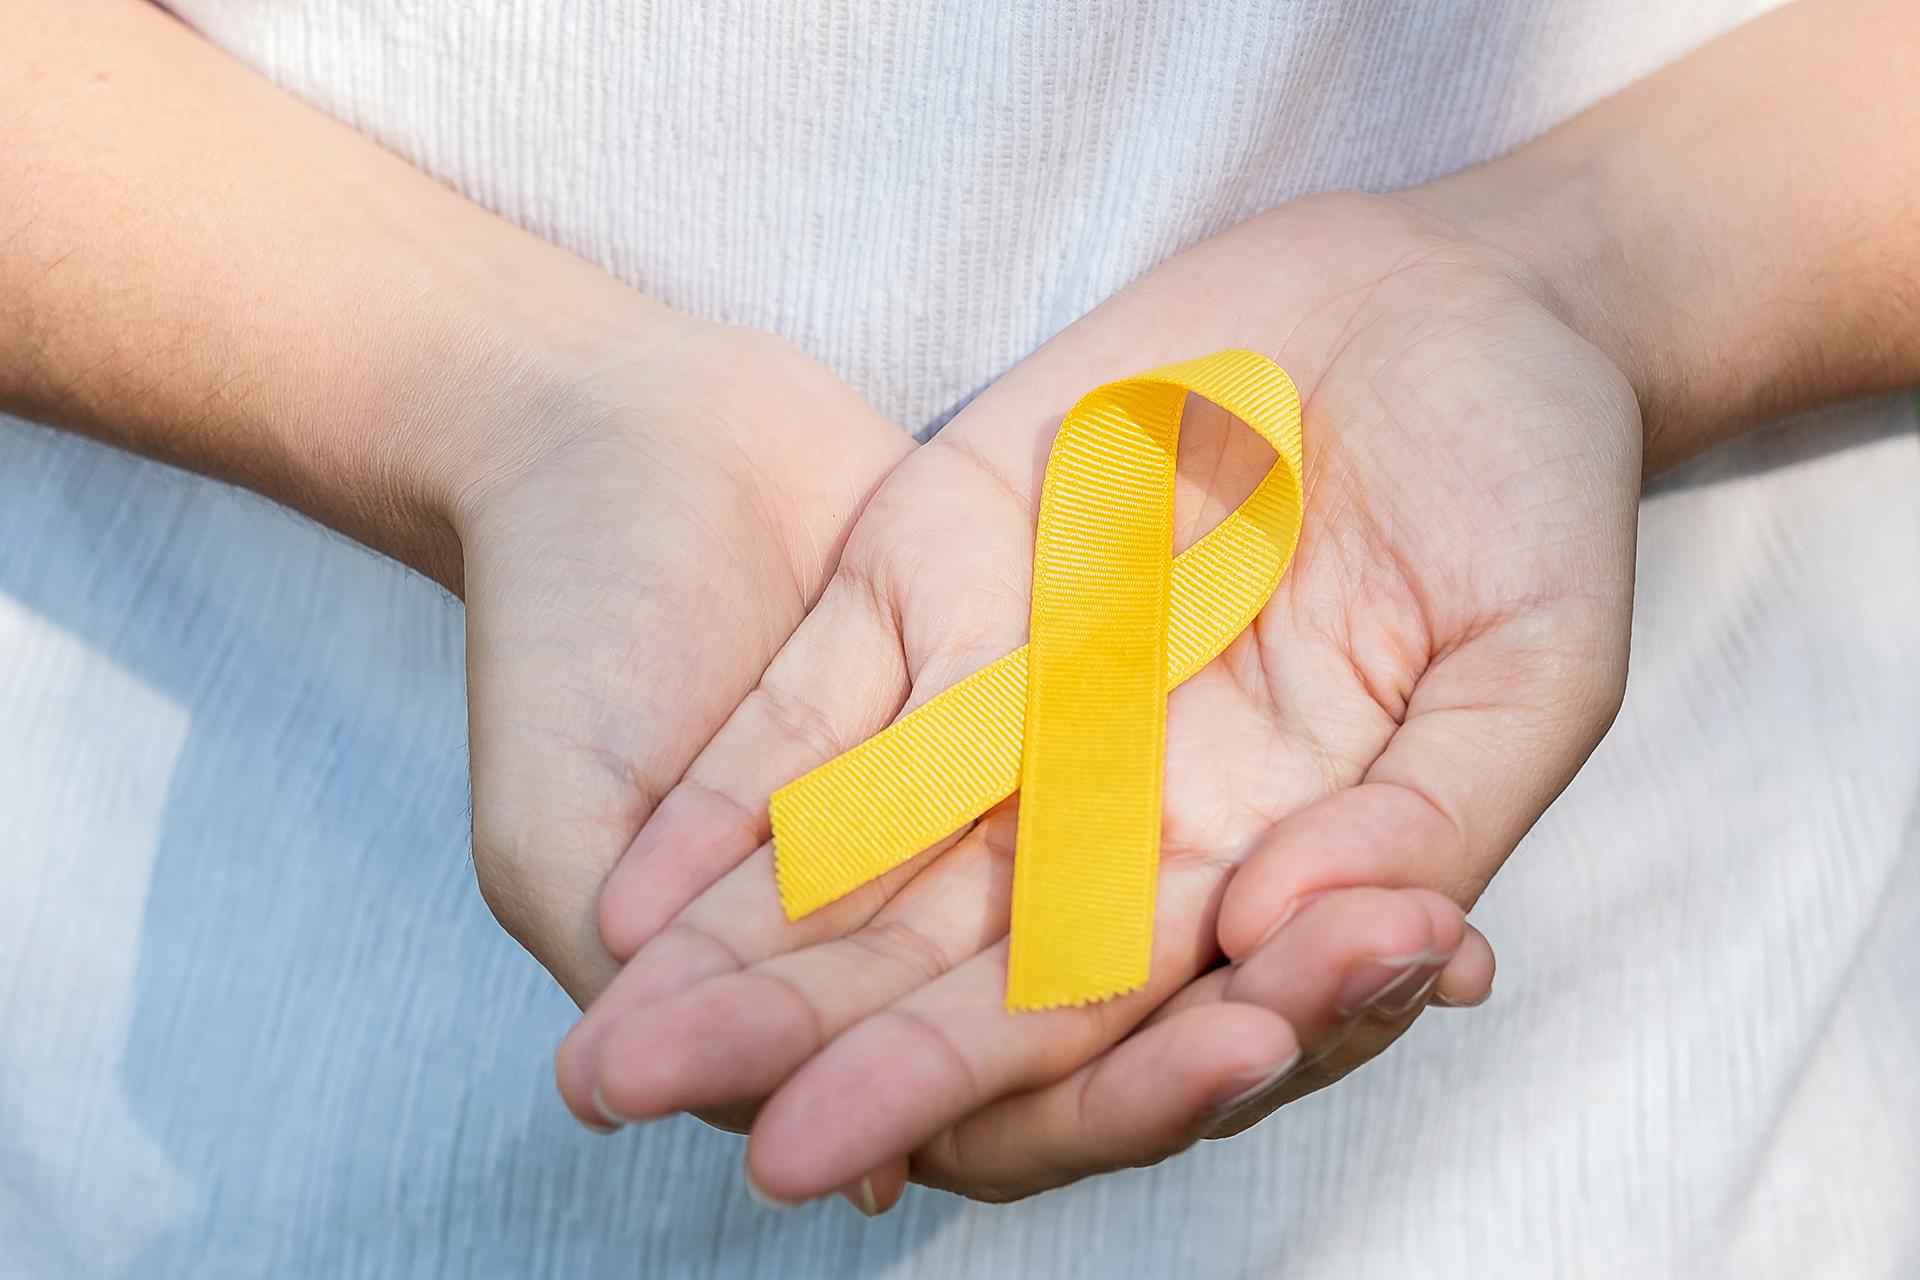 8 Major Common Types of Childhood Cancer You Need to Know About